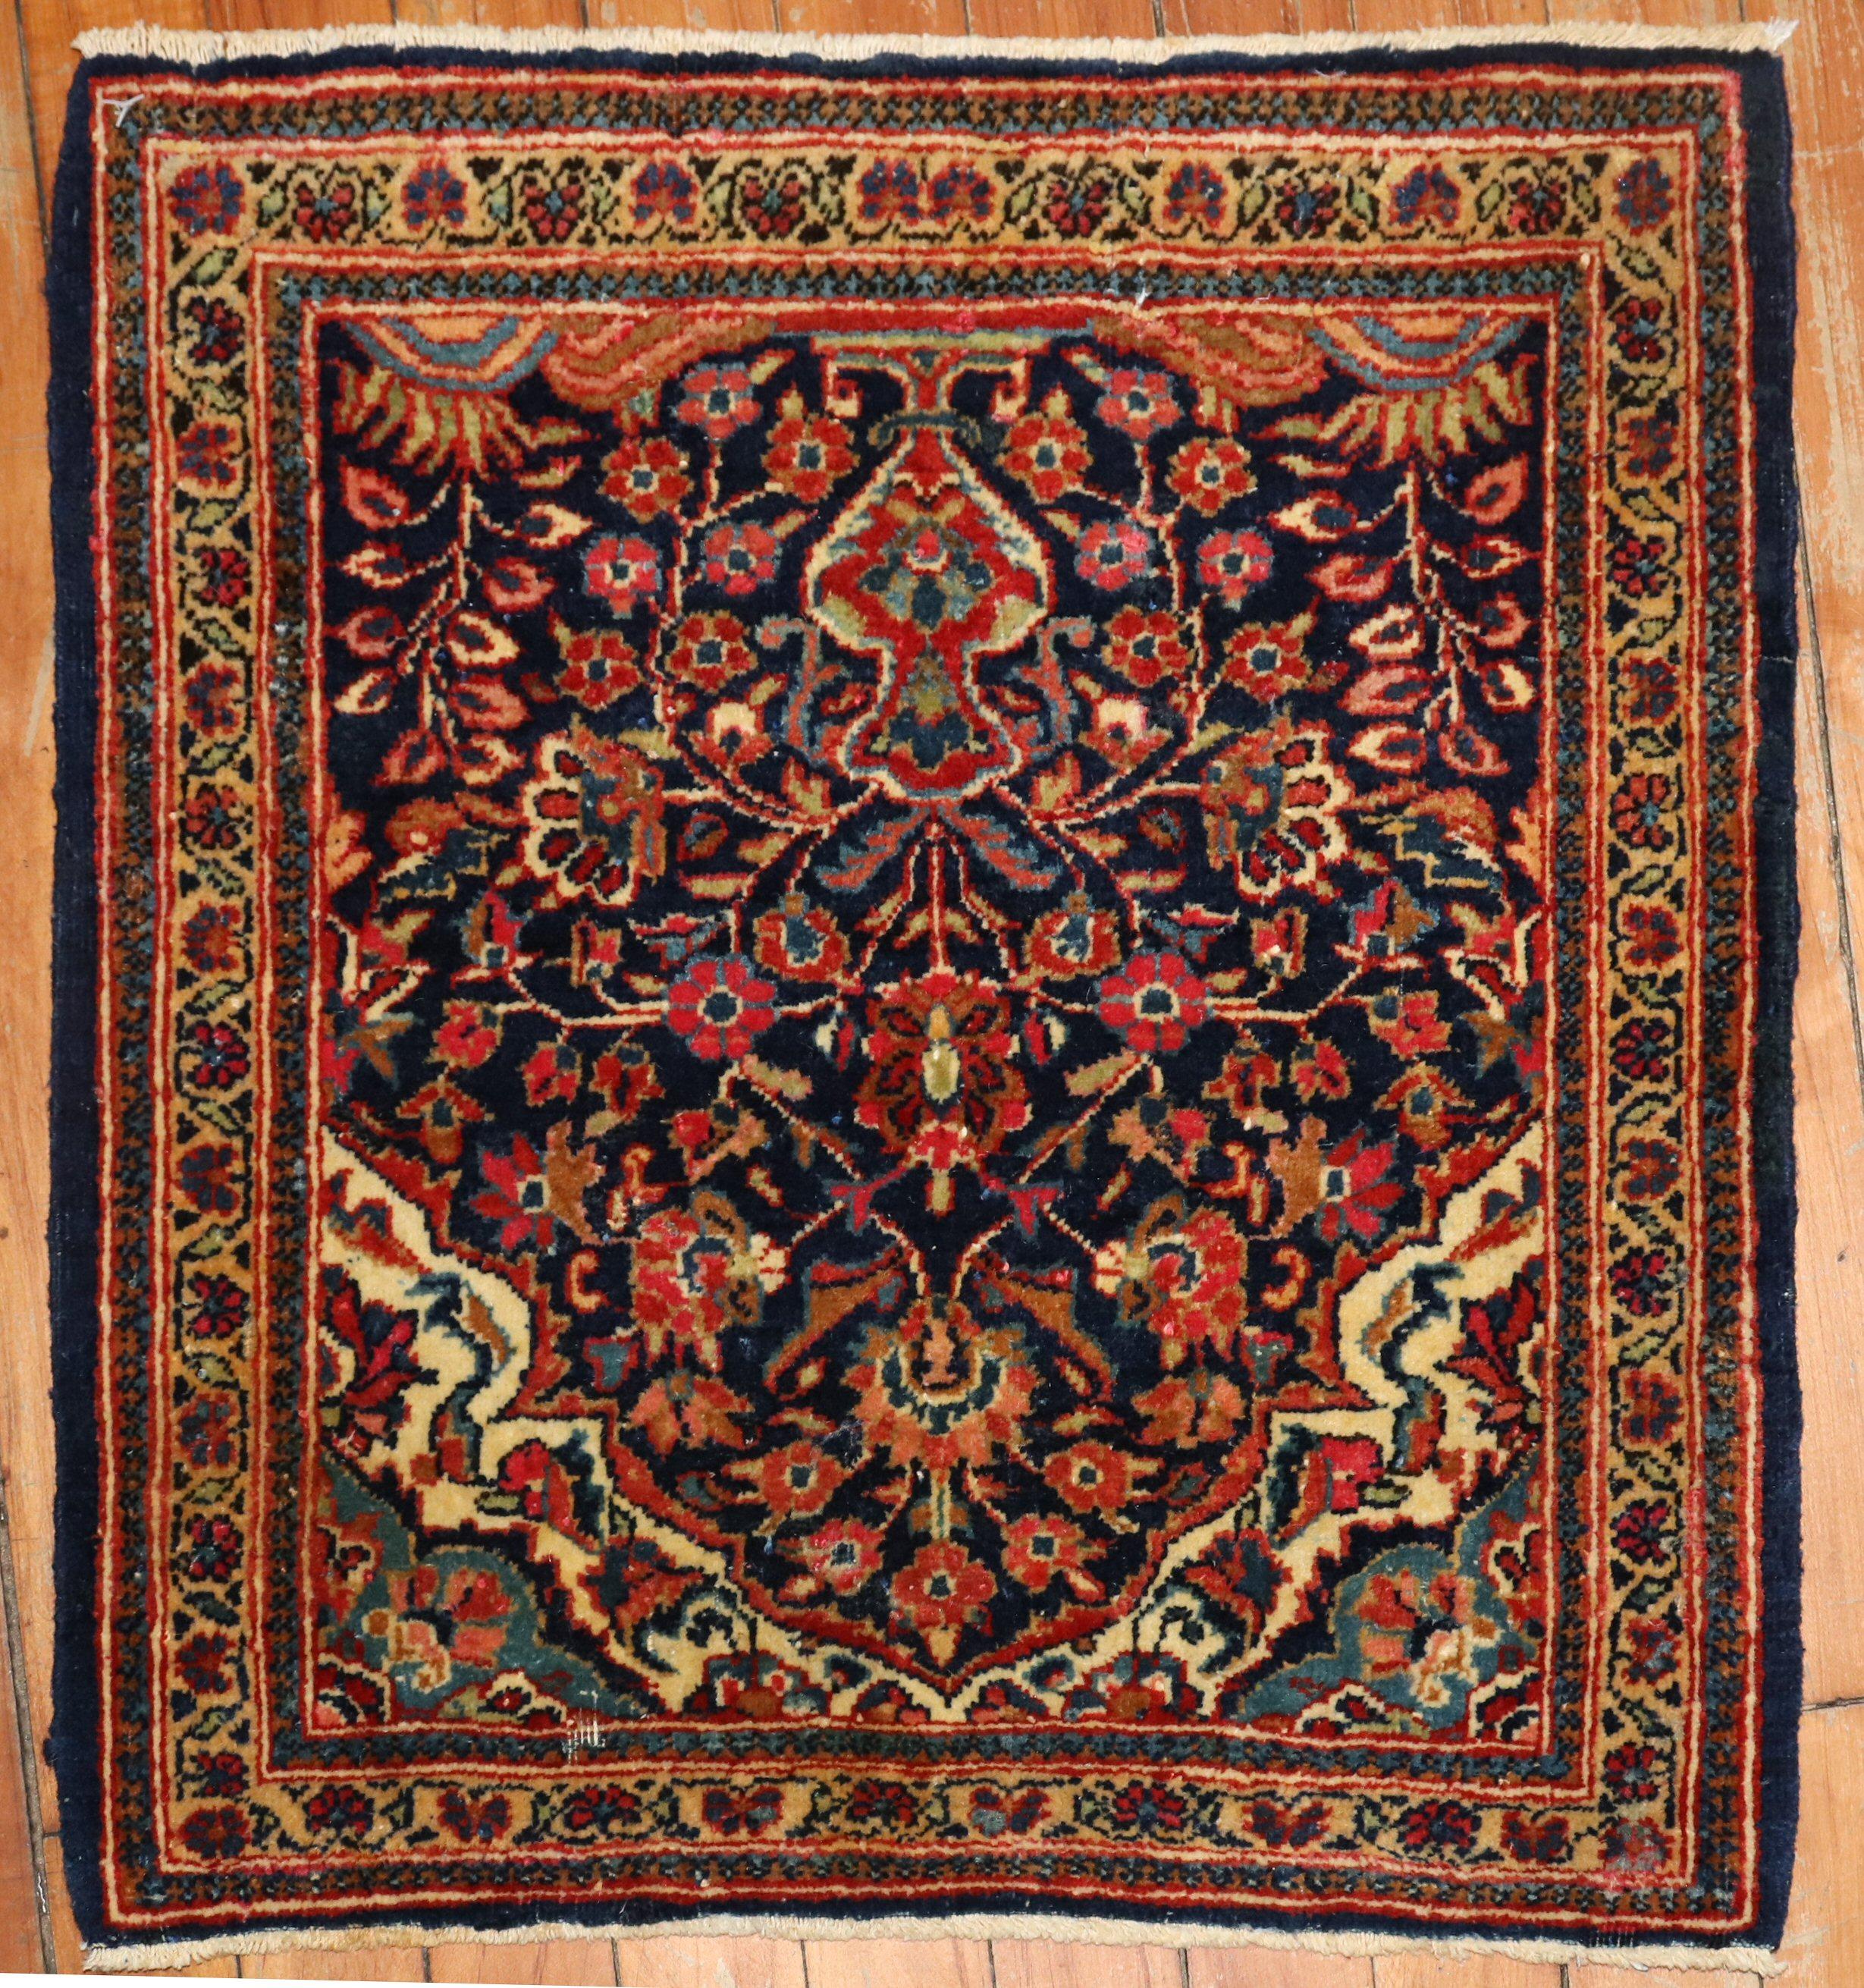 1930s Persian Kashan Mat in good overall condition

Details
rug no.	30692
size	1' 9